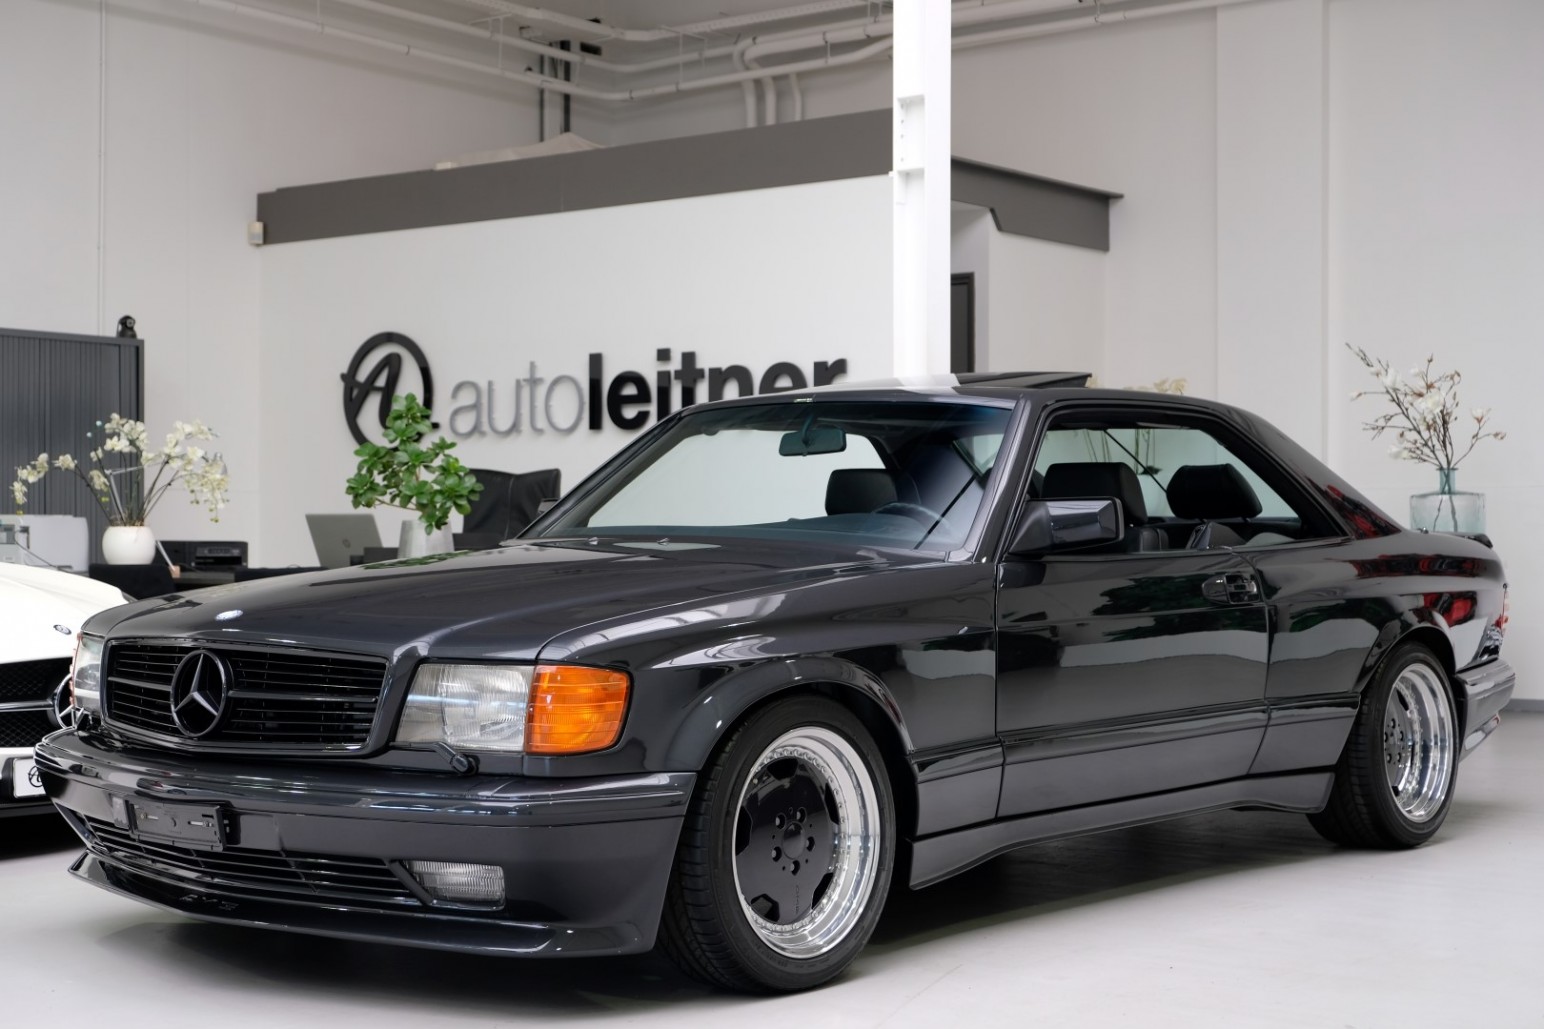 1989-mercedes-560-sec-amg-6-0-widebody-is-intimidating-and-so-is-its